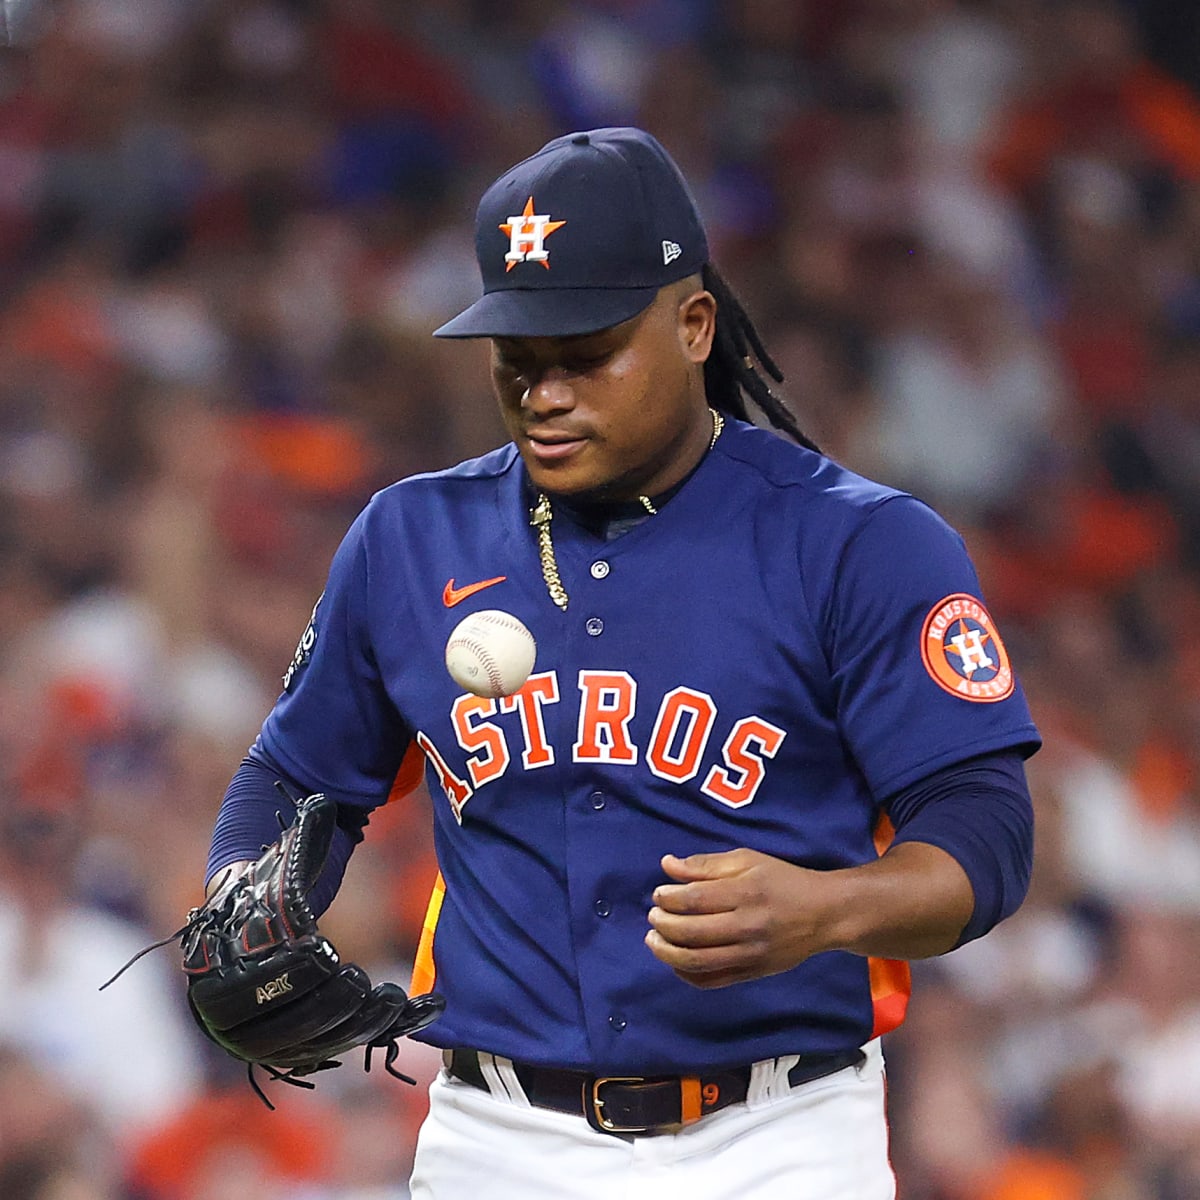 Astros Opening Day: Framber Valdez to take mound as new ace